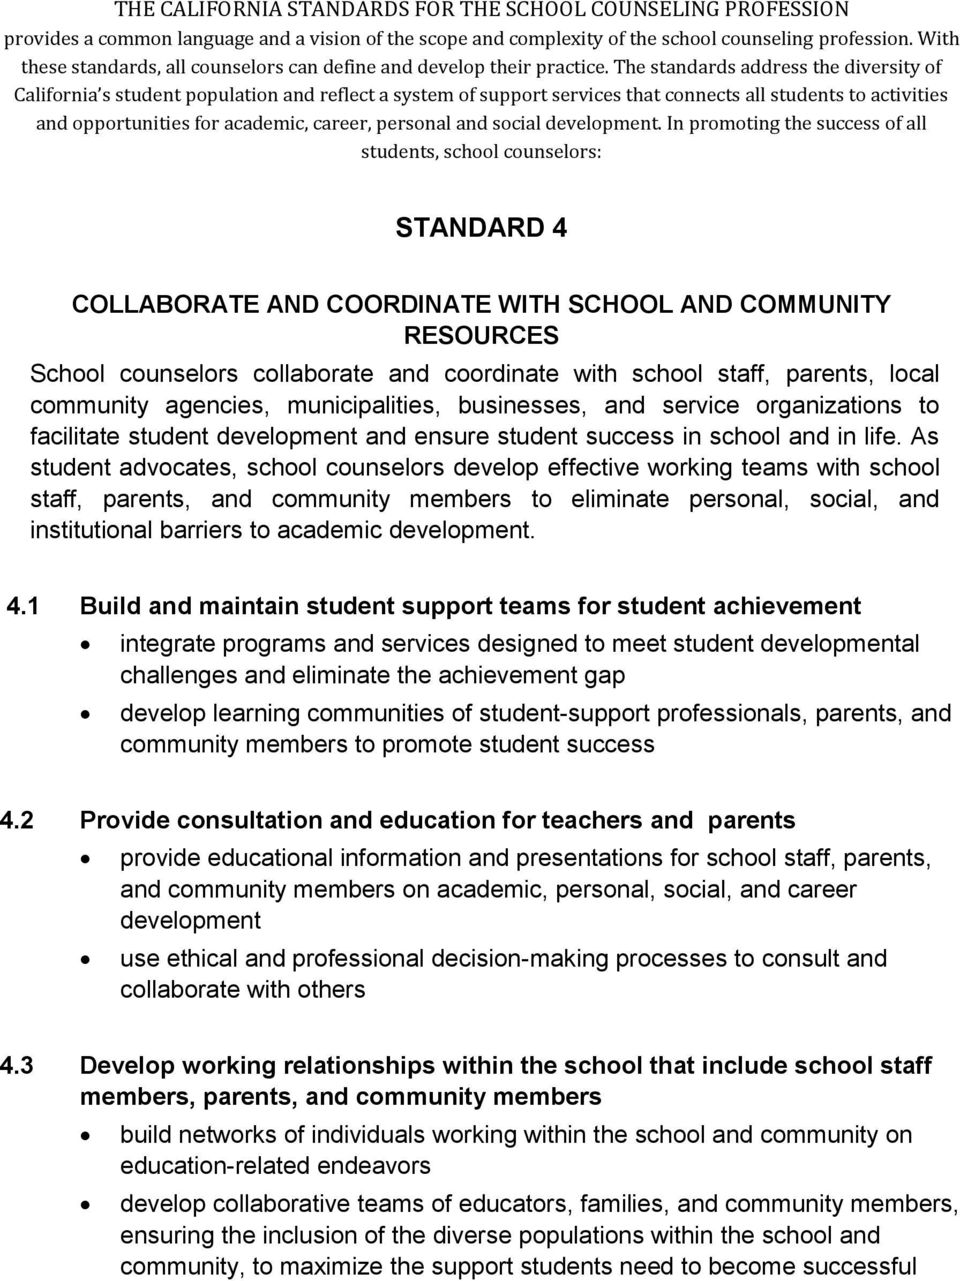 As student advocates, school counselors develop effective working teams with school staff, parents, and community members to eliminate personal, social, and institutional barriers to academic